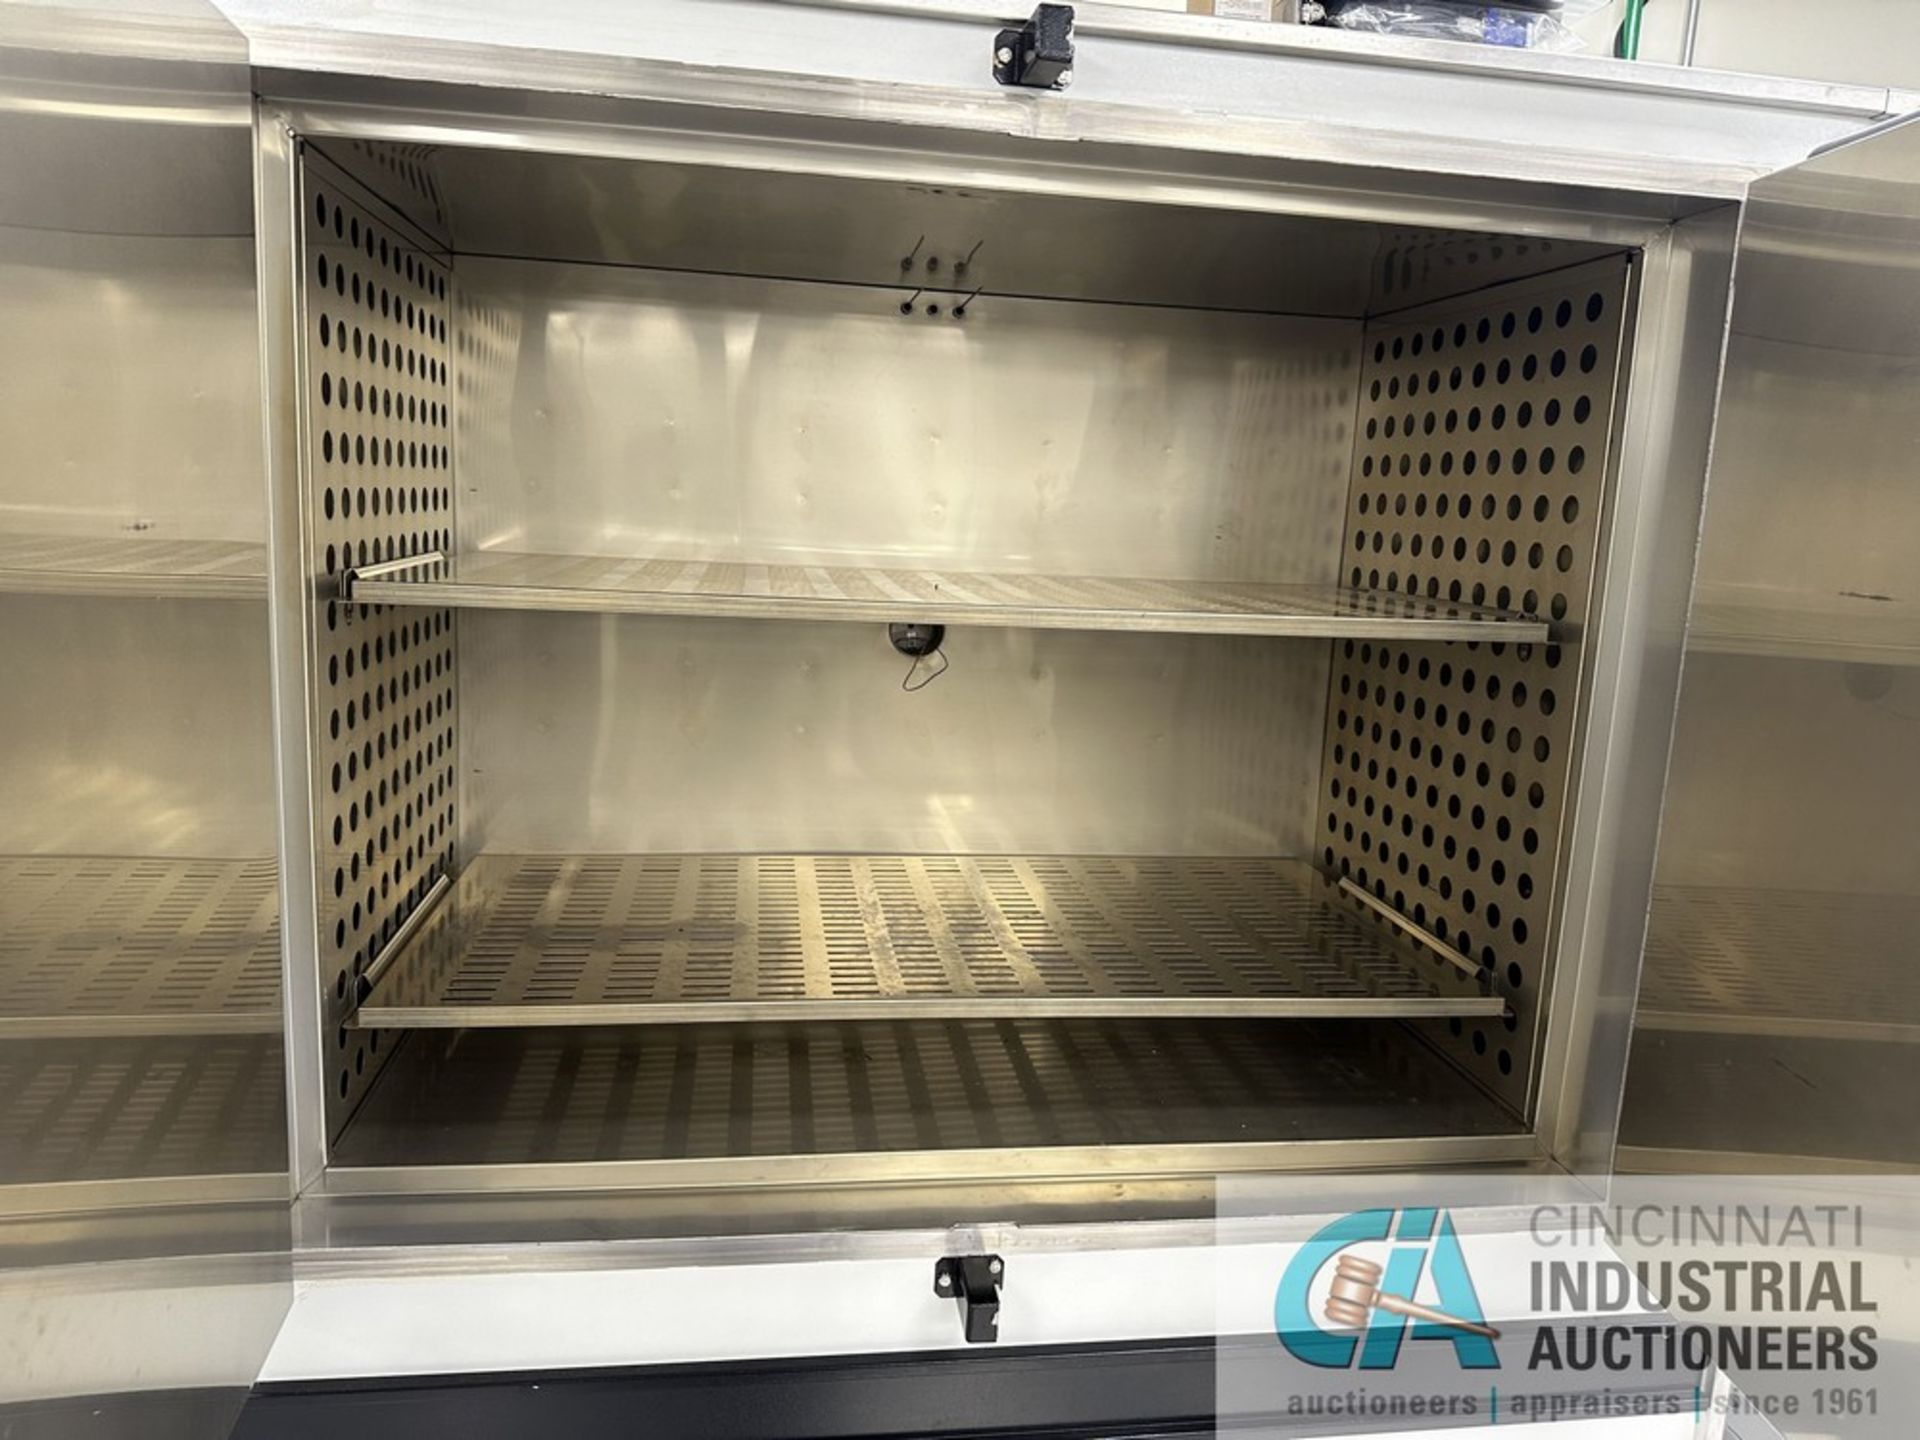 BLUE M DC-1406-F-F4 MECHANICAL CONVECTION OVEN; S/N 116237 (JASM) - Image 4 of 7